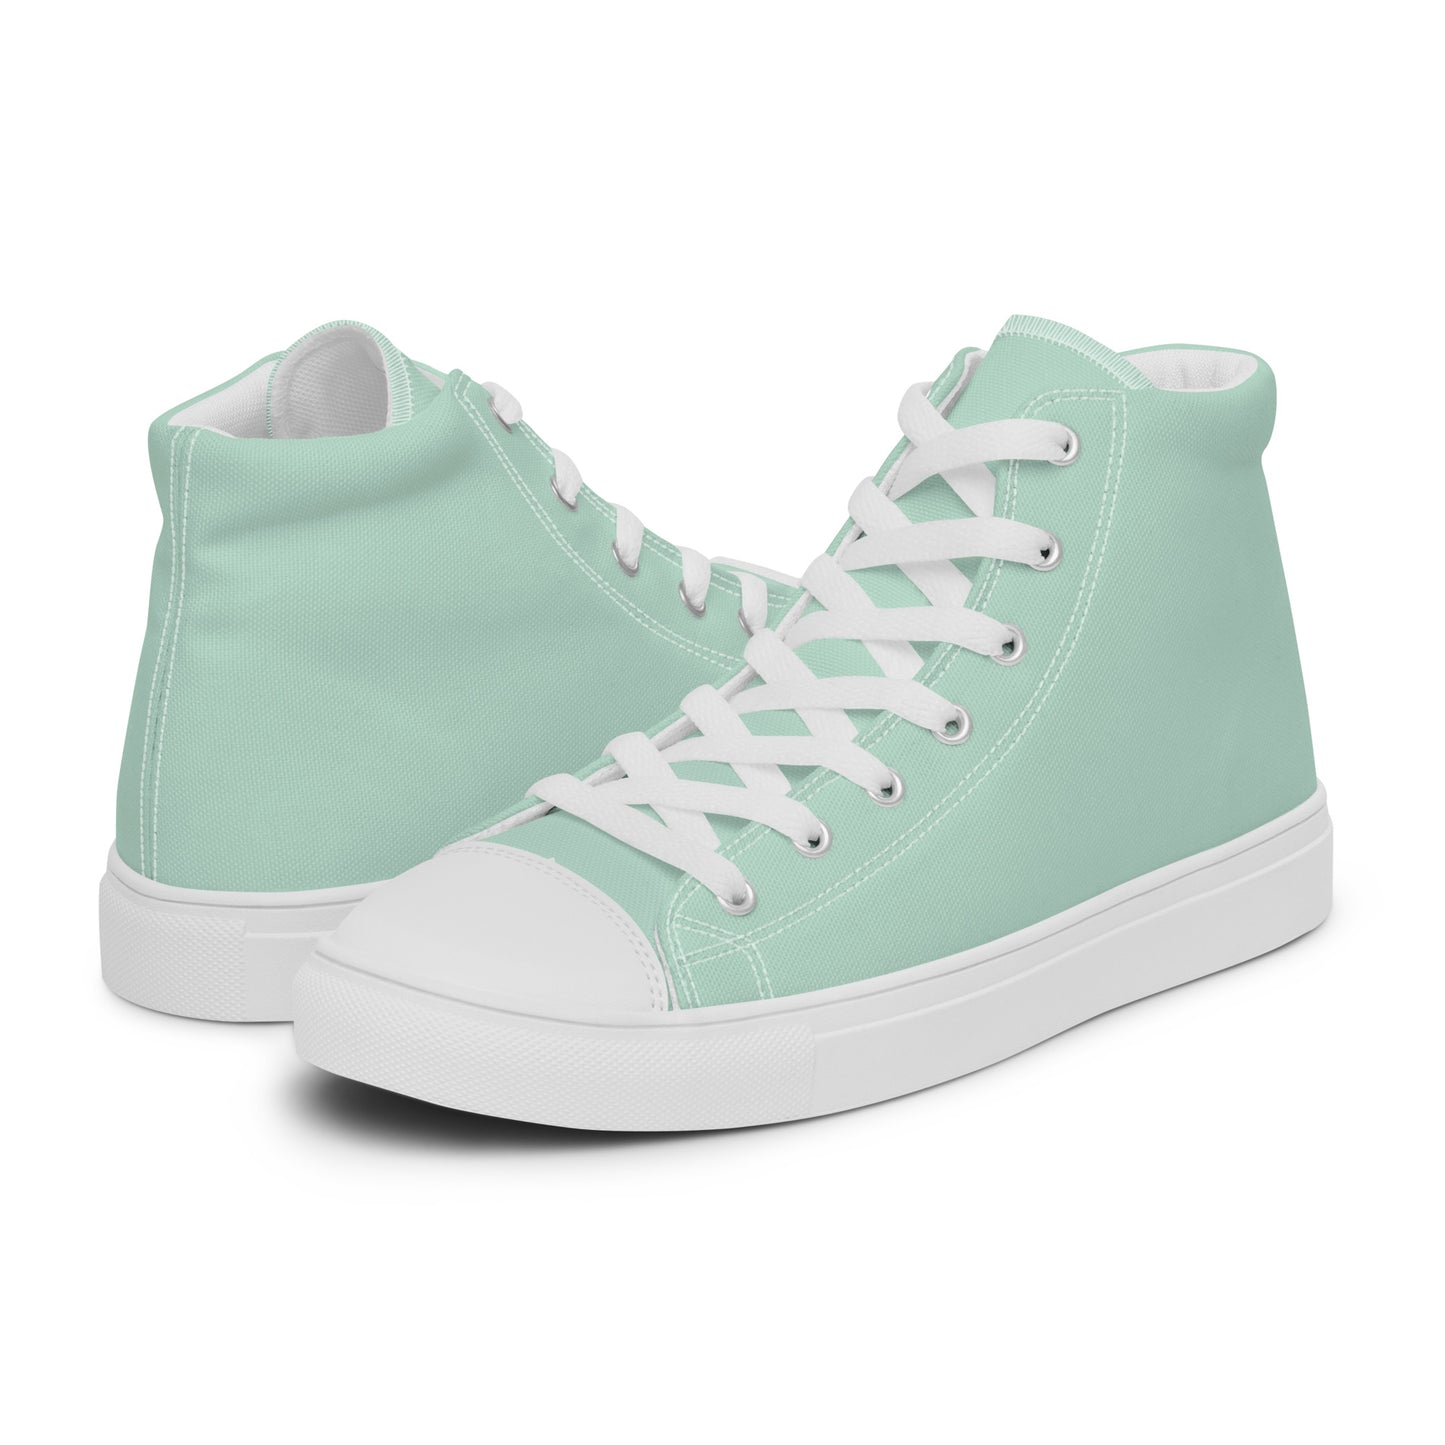 Aqua - Sustainably Made Men's High Top Canvas Shoes